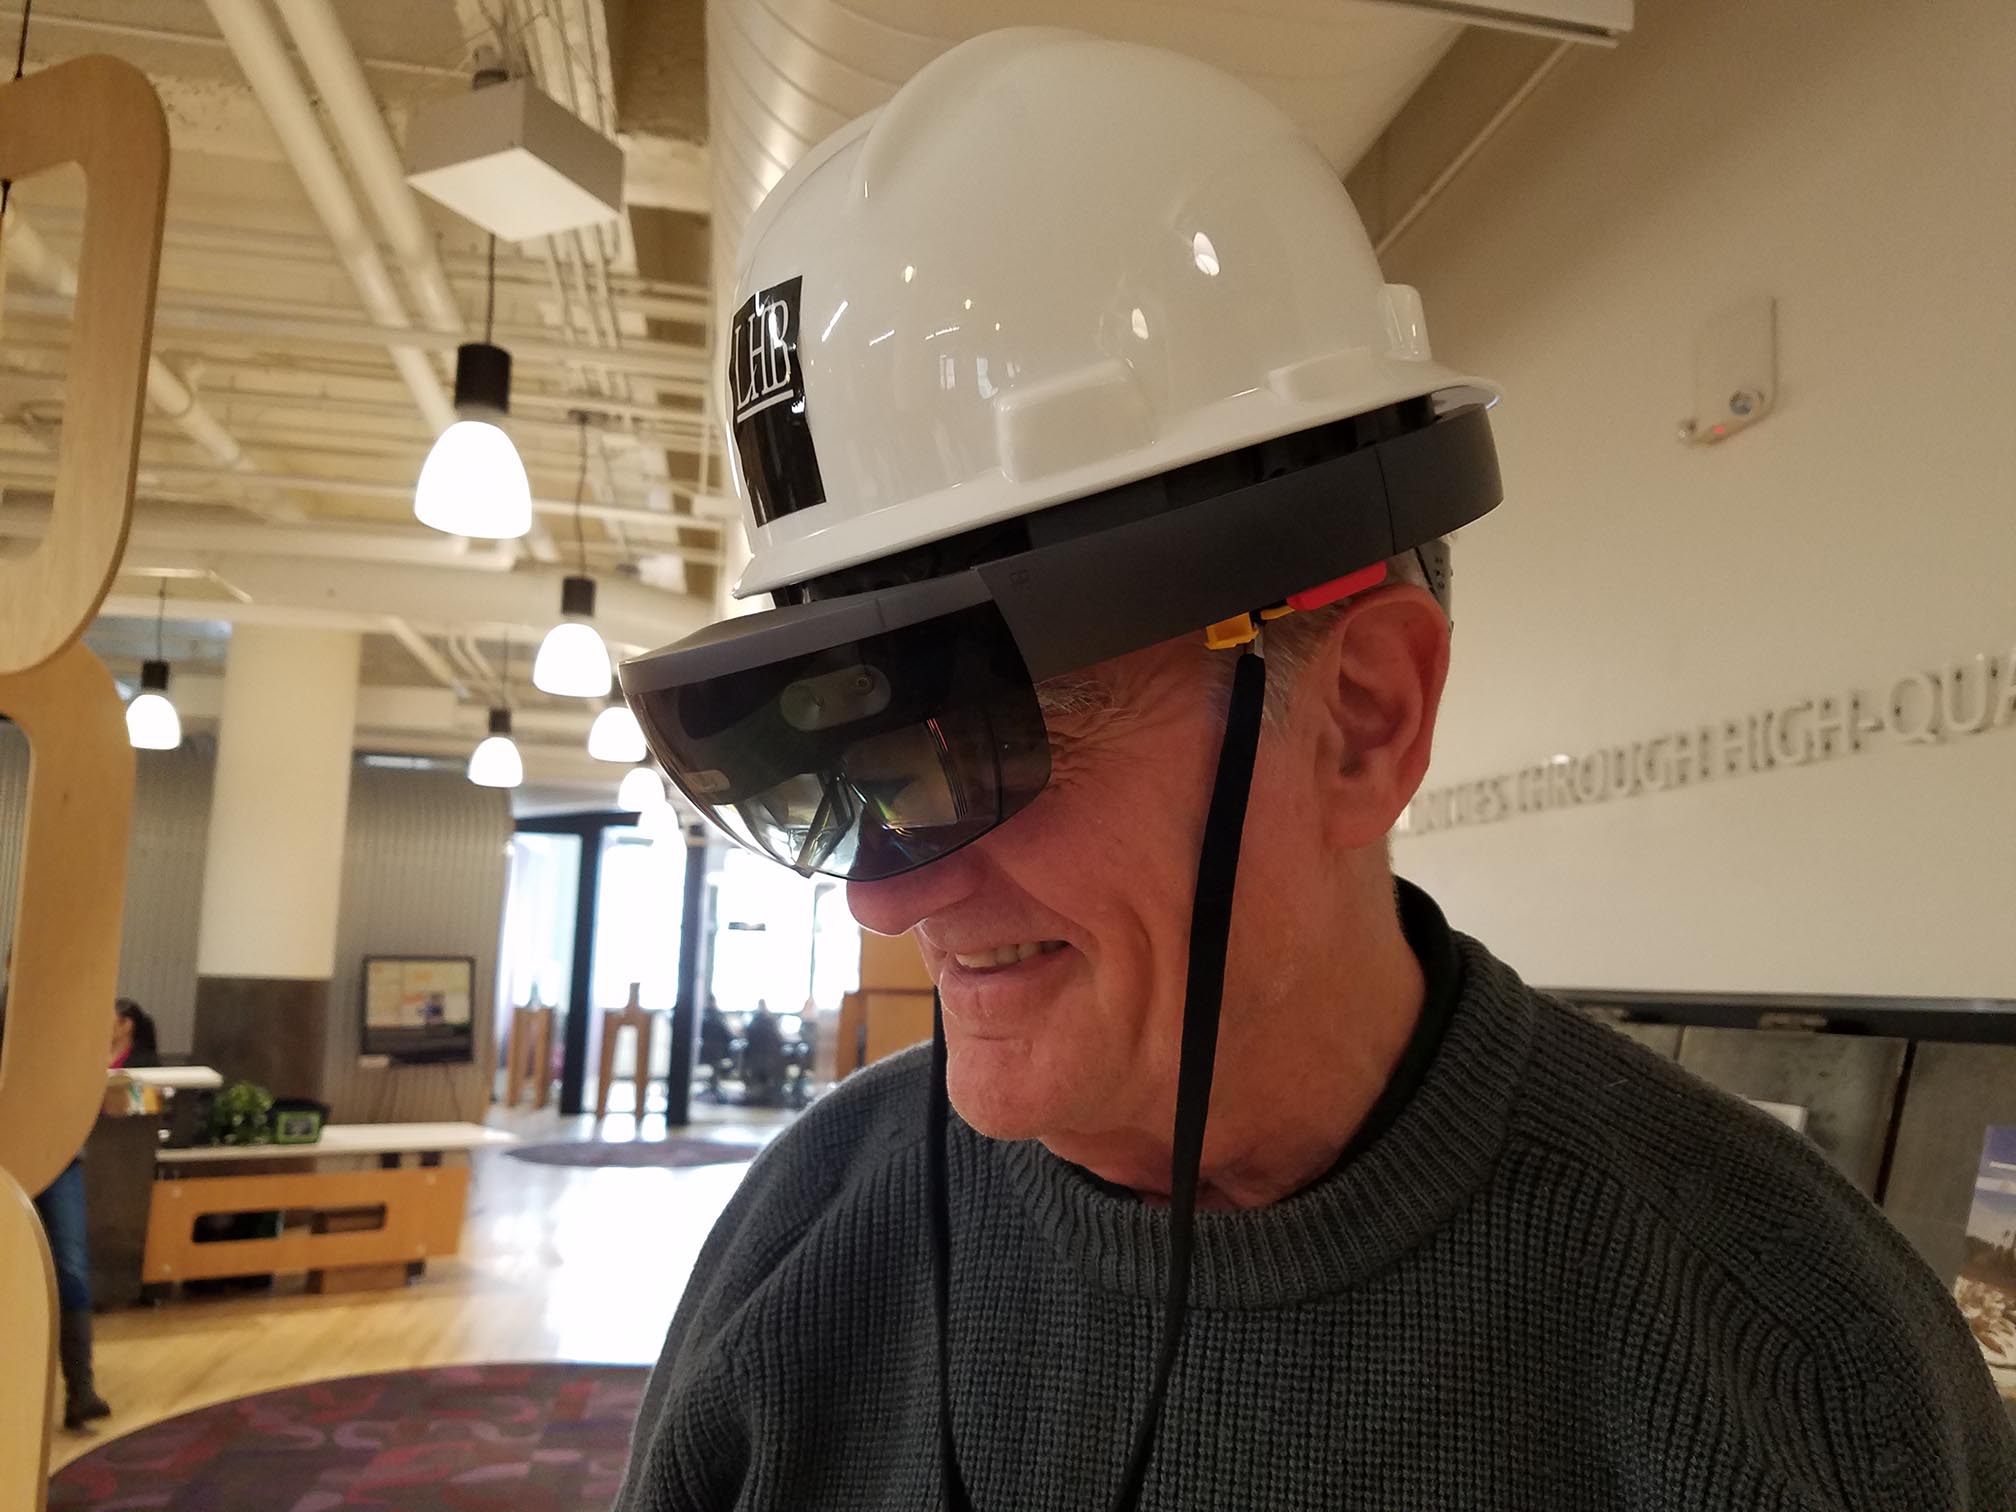 LHB Construction Administrator Roger Purdy using the Microsoft Hololens with Trimble hardhat for Hololens Image courtesy LHB Corp. https://www.lhbcorp.com